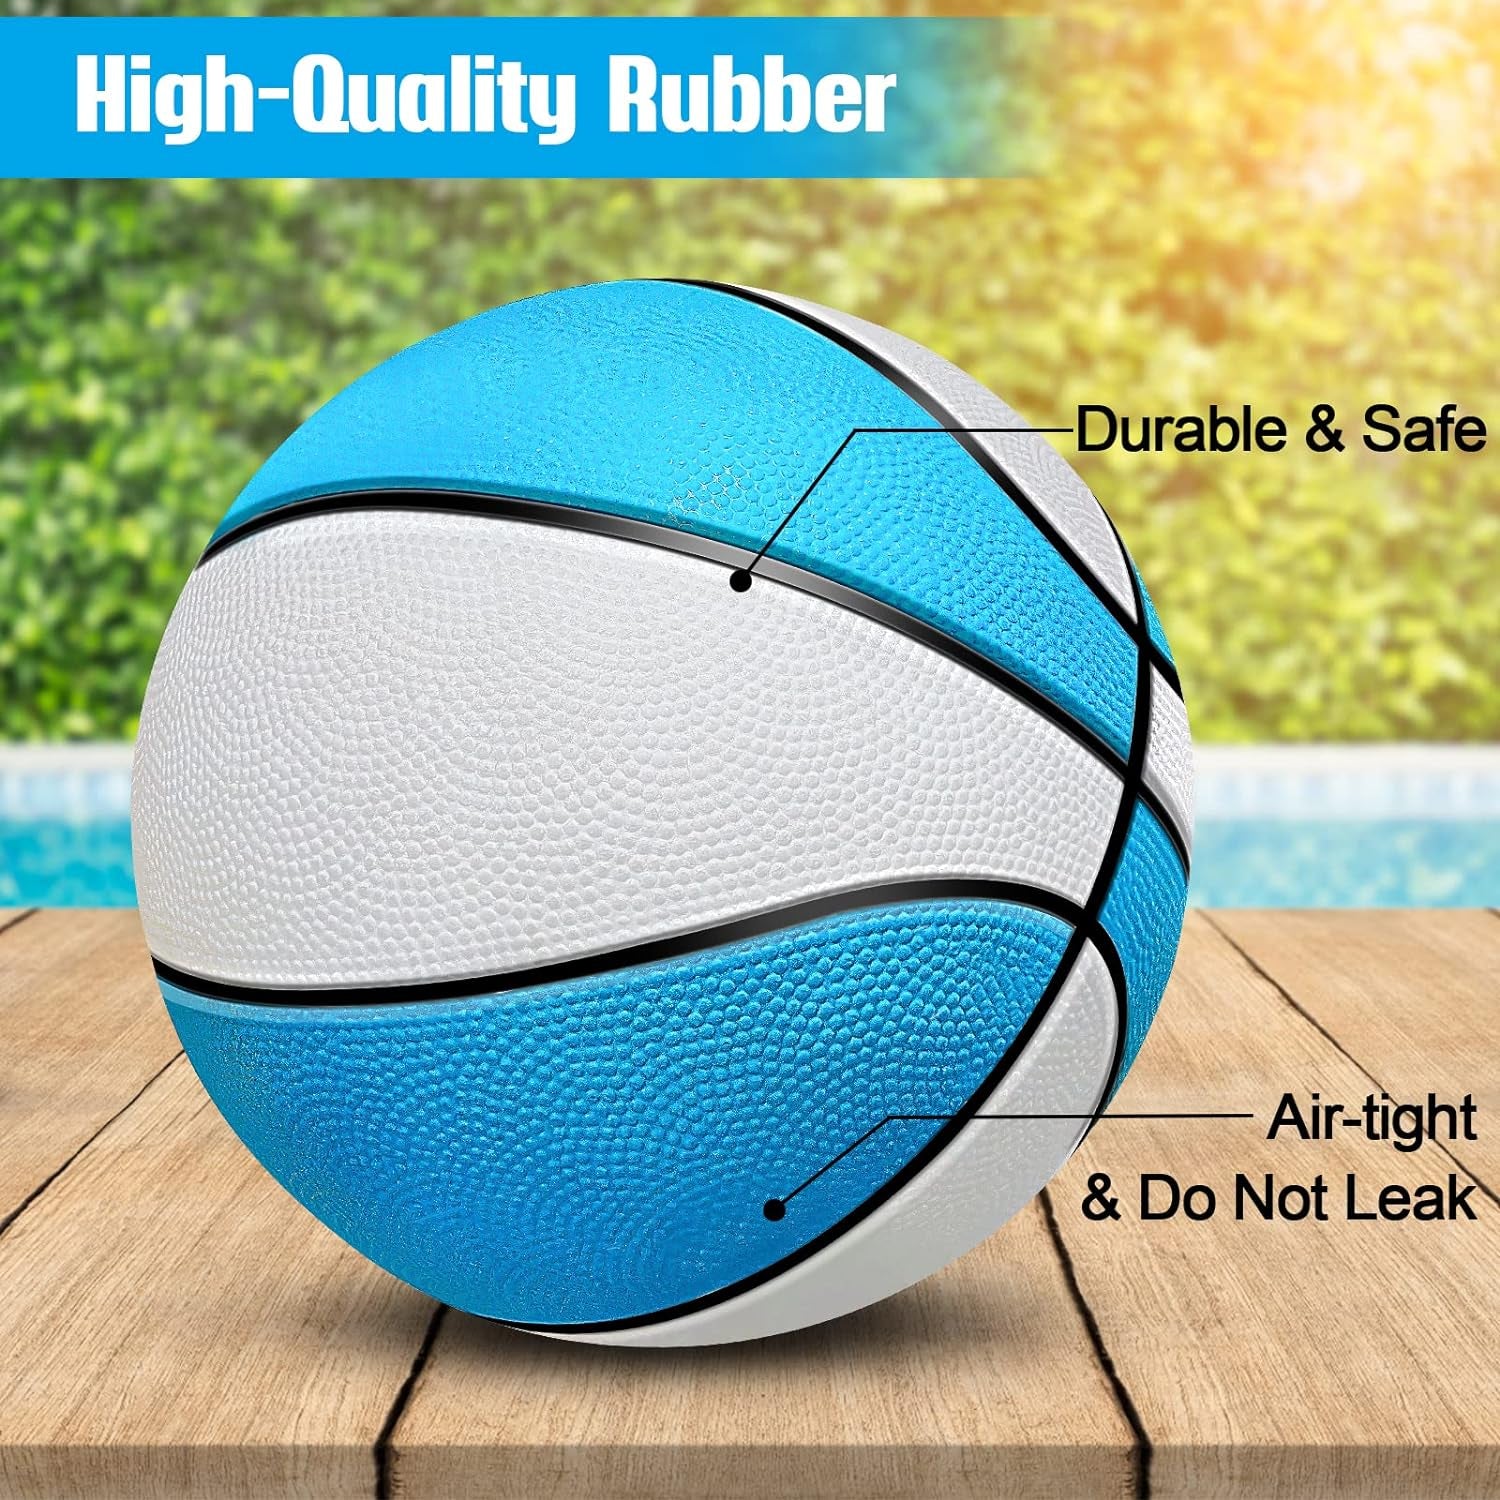 Mini Basketball Replacement 8.5 Inch Mini Pool Basketballs Ball Hoop Indoor Outdoor Toy, Fits All Standard Swimming Pool Basketball Hoop Pool Game Toy Water Games